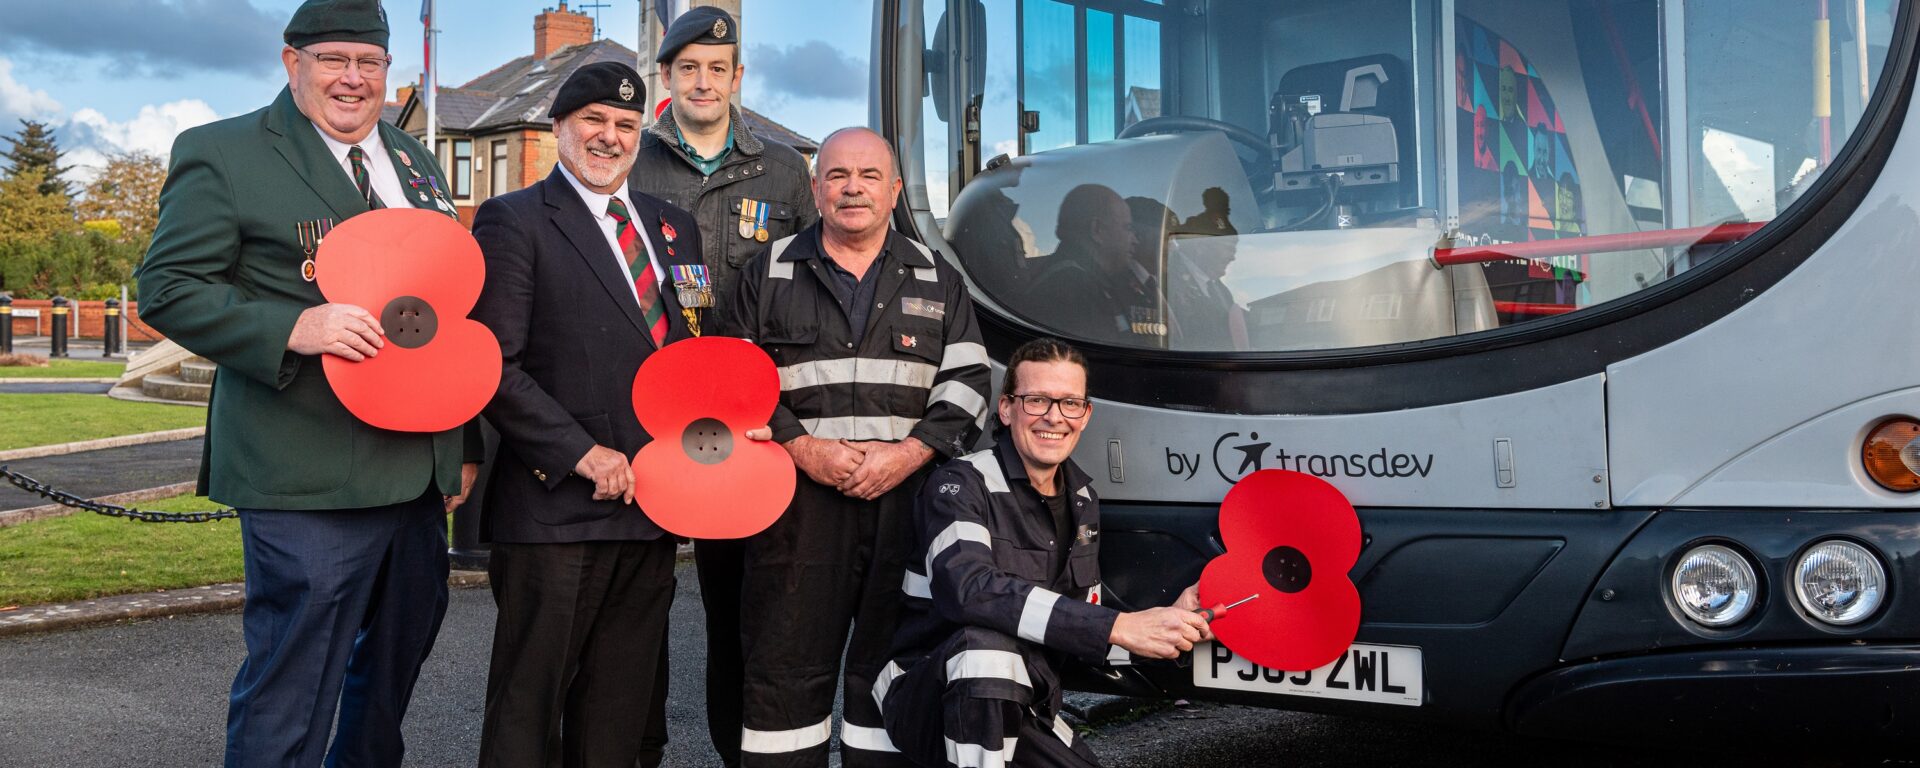 Transdev UK’s moving act of remembrance pays tribute to the fallen